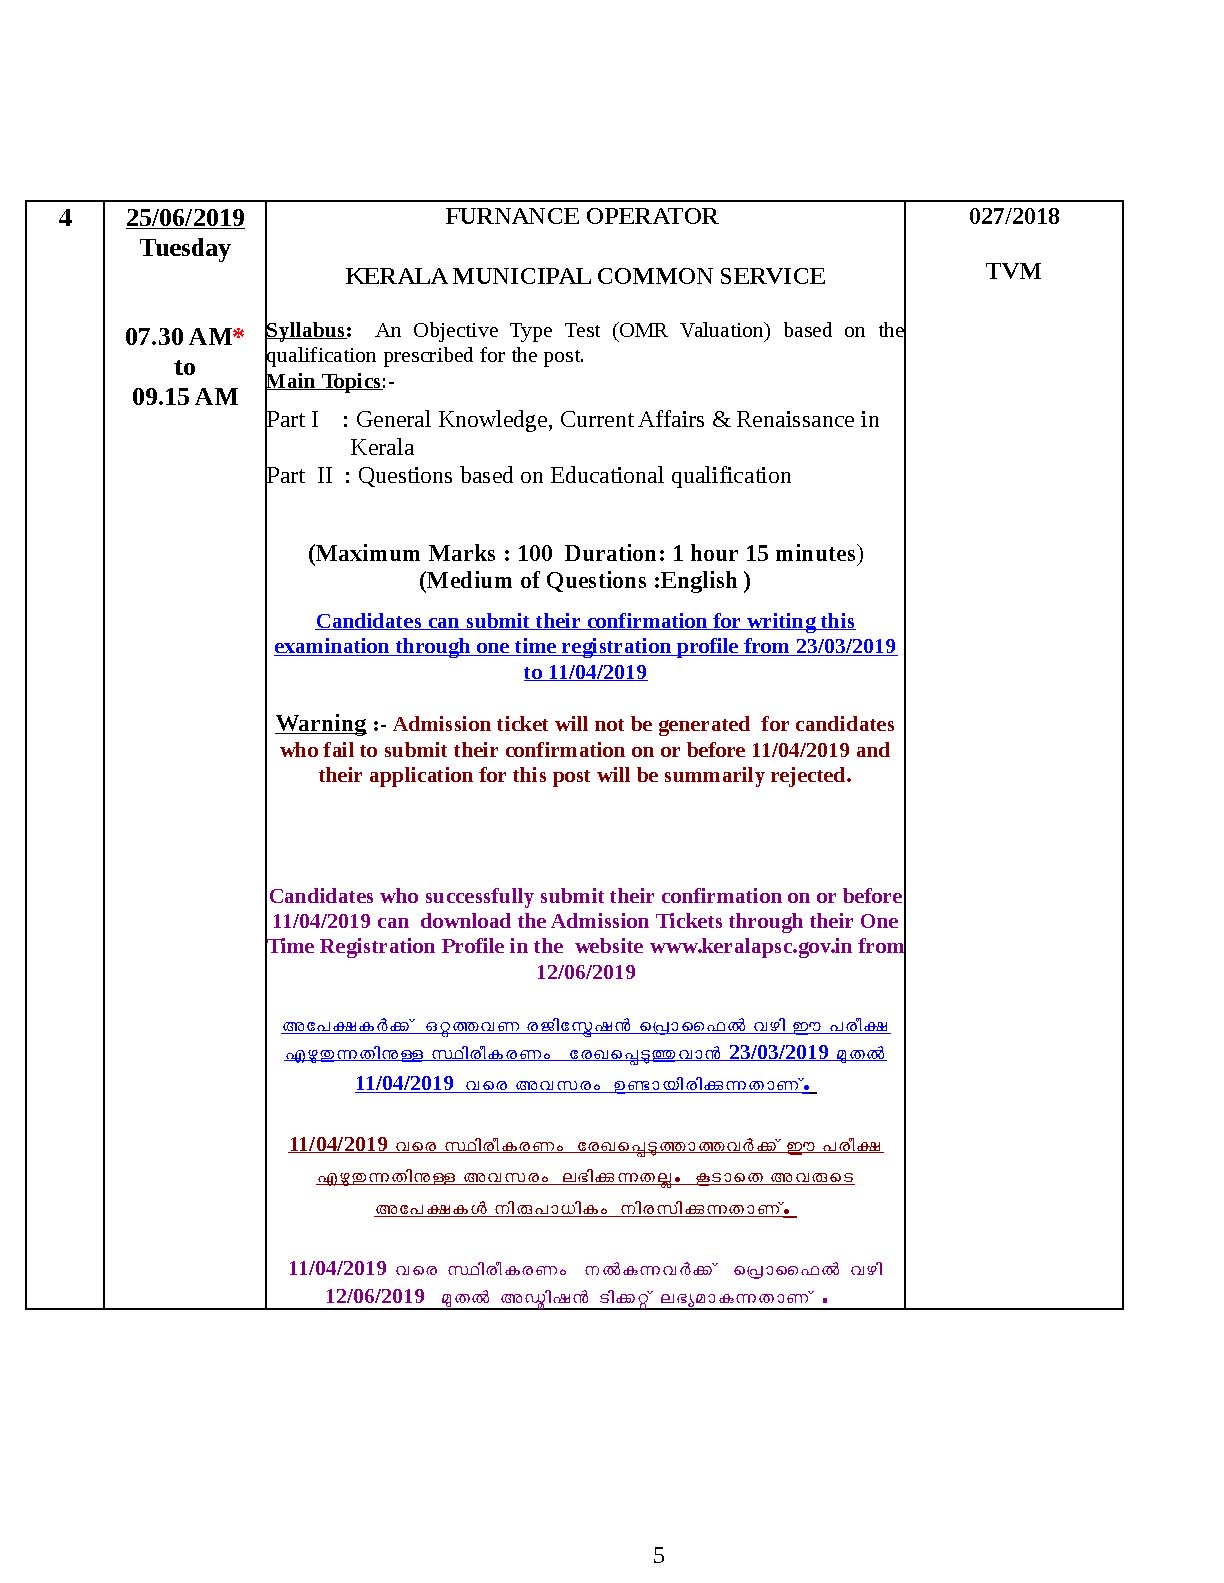 KPSC Examination Programme For The Month Of June 2019 - Notification Image 5